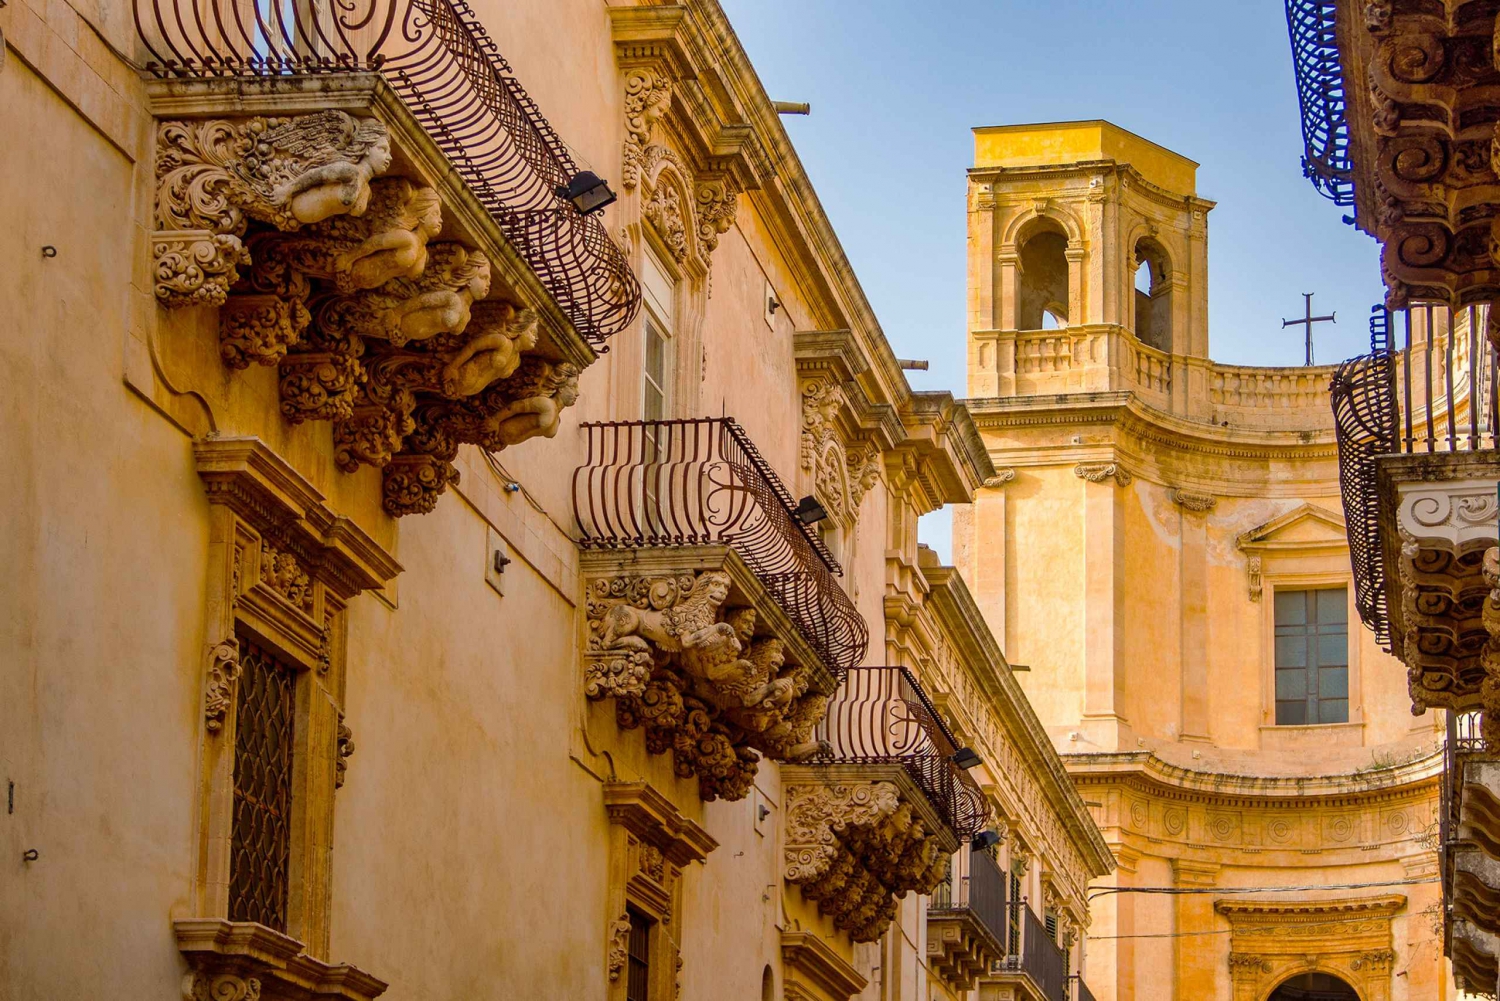 Noto: Baroque Architecture and City Highlights Guided Tour